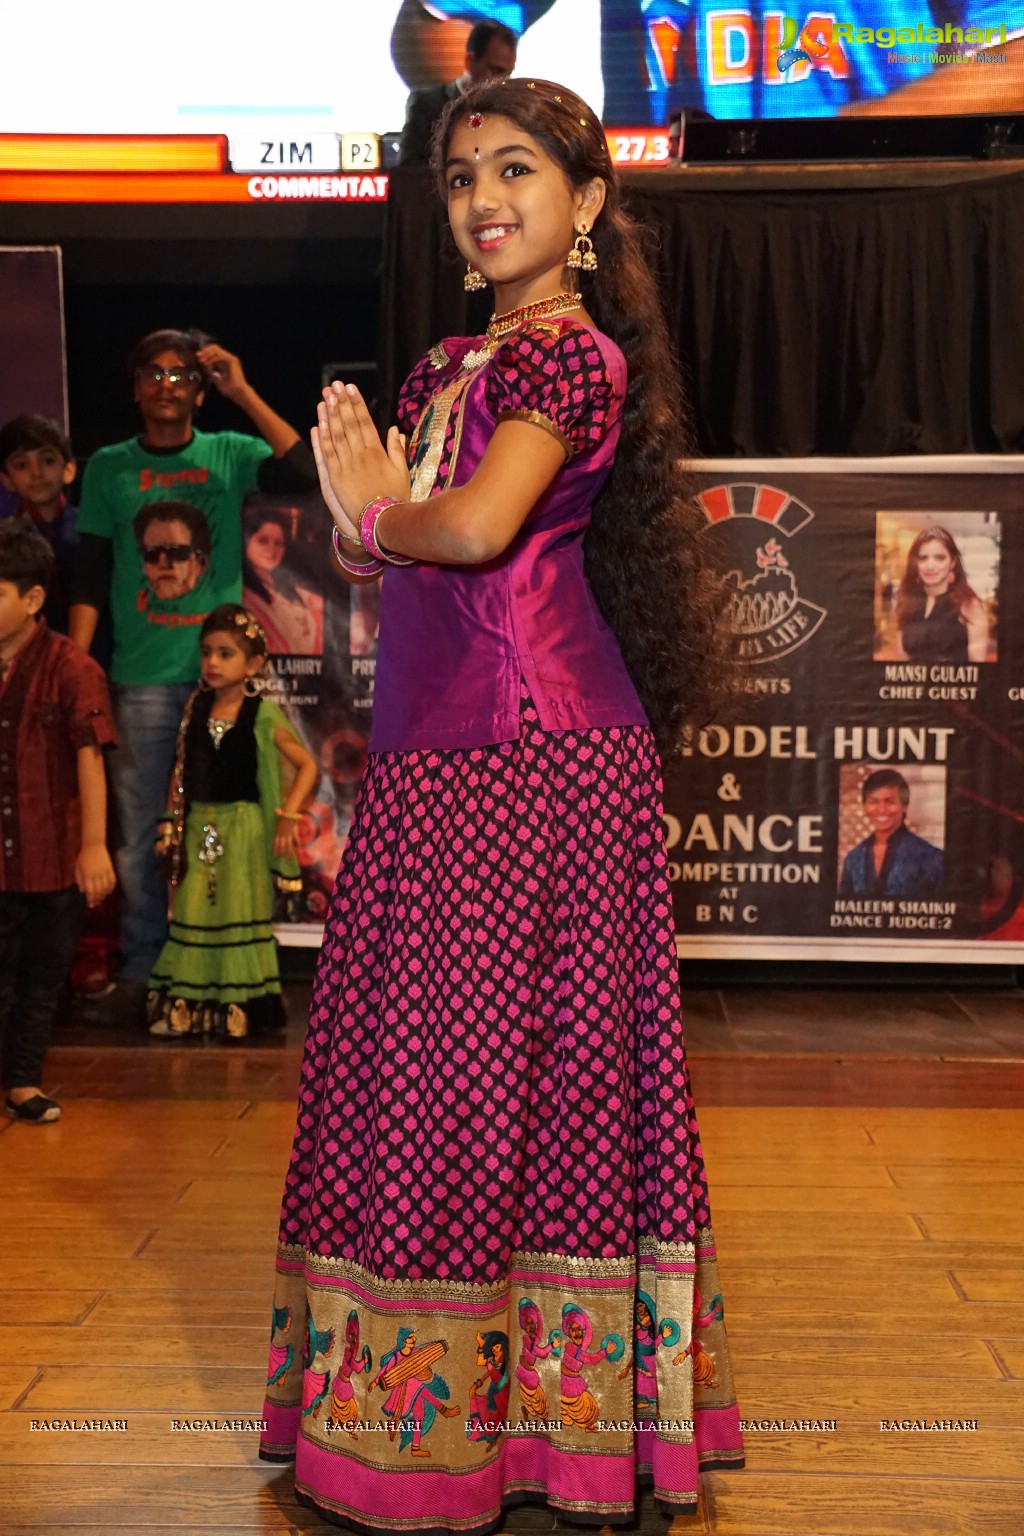 The City Hi Life Kids Model Hunt and Dance Competition